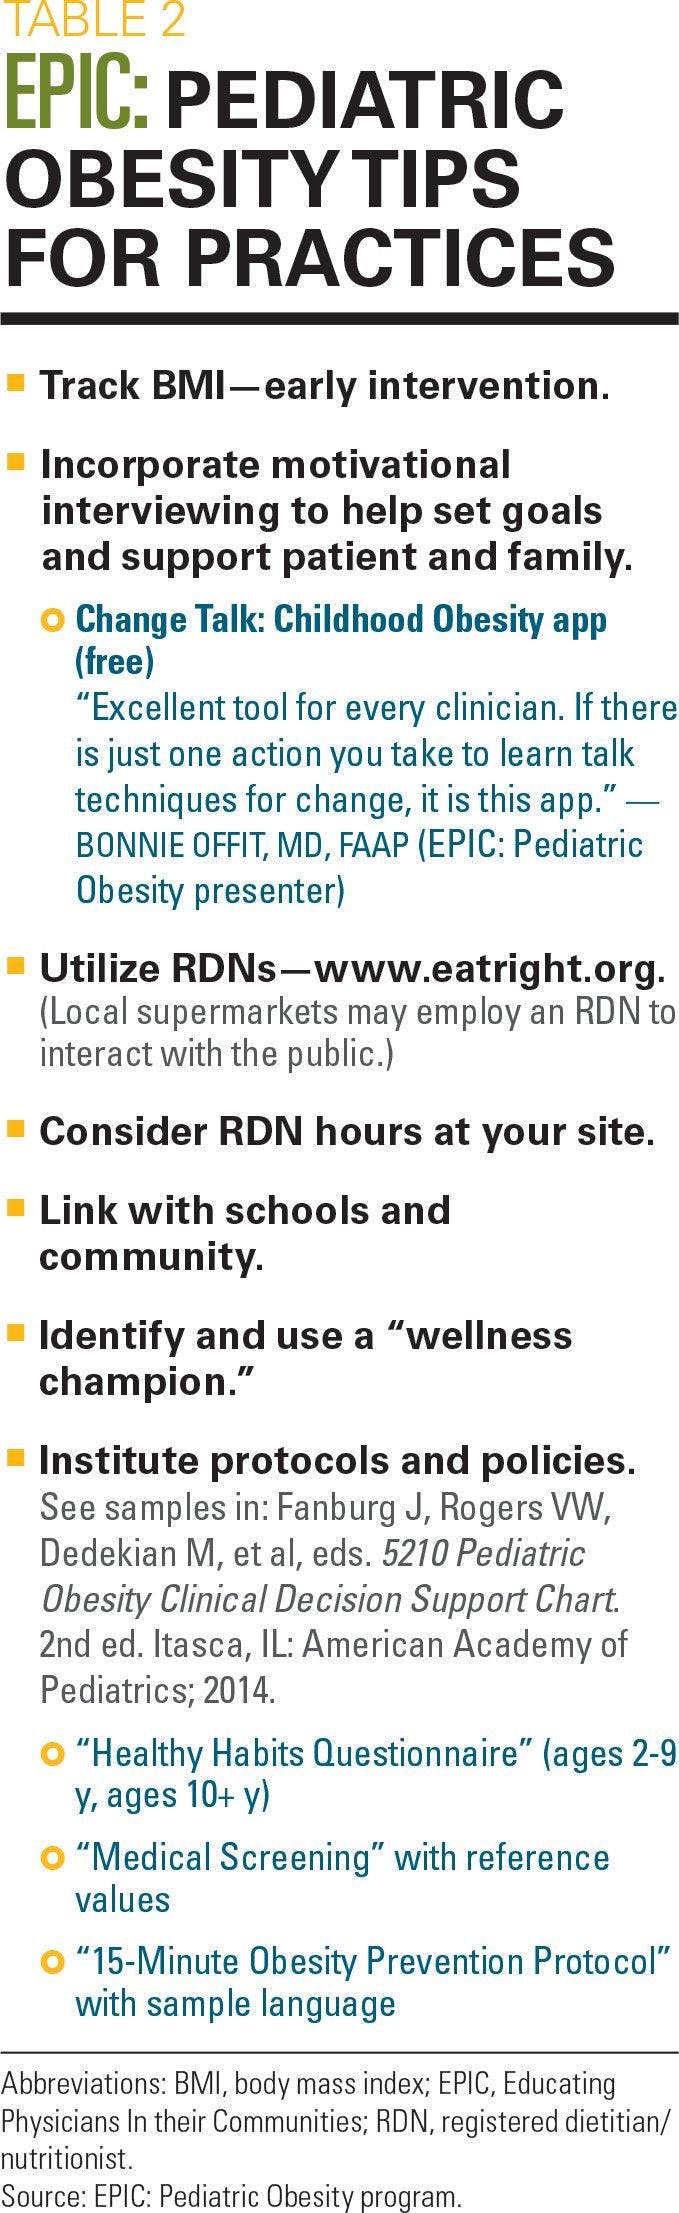 EPIC: Pediatric obesity tips for practices